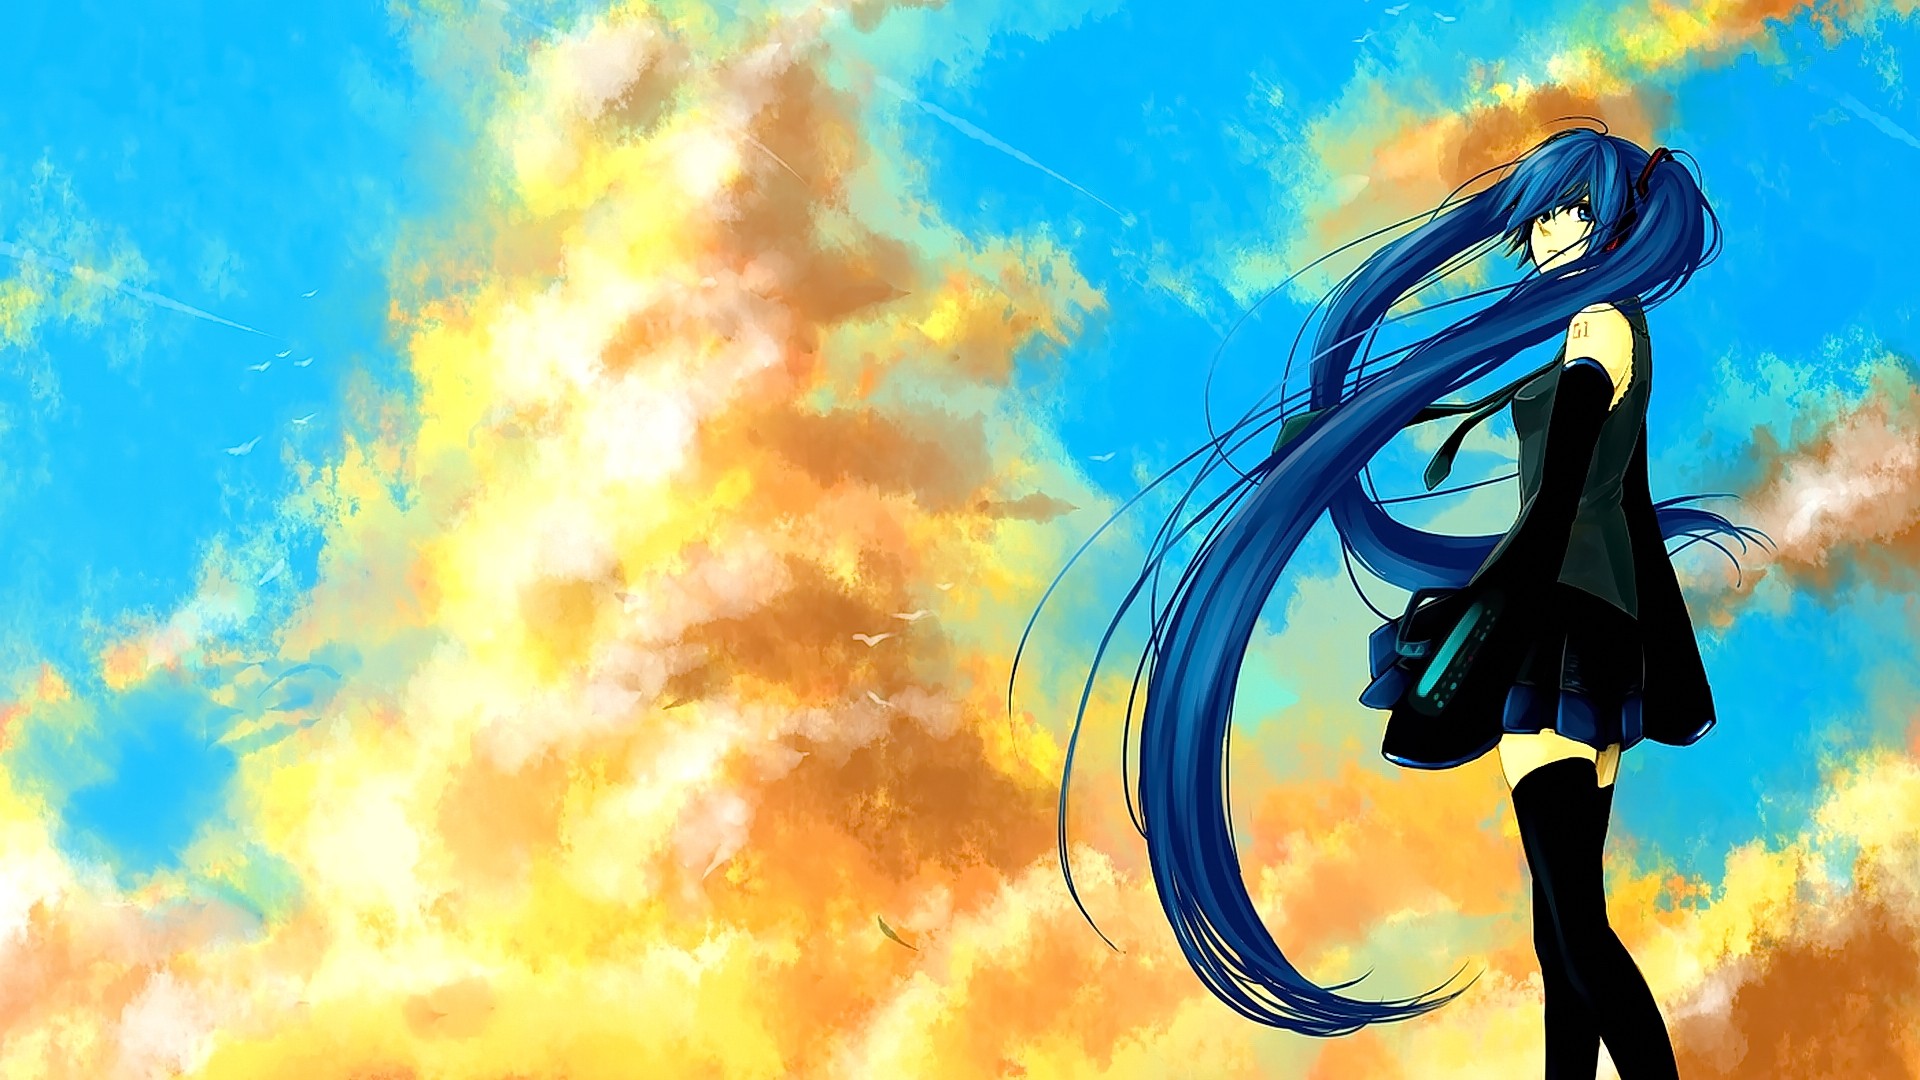 Anime 1920x1080 anime anime girls long hair blue hair blue eyes sky clouds looking away Vocaloid Hatsune Miku yellow cyan stockings black stockings tie skirt looking into the distance